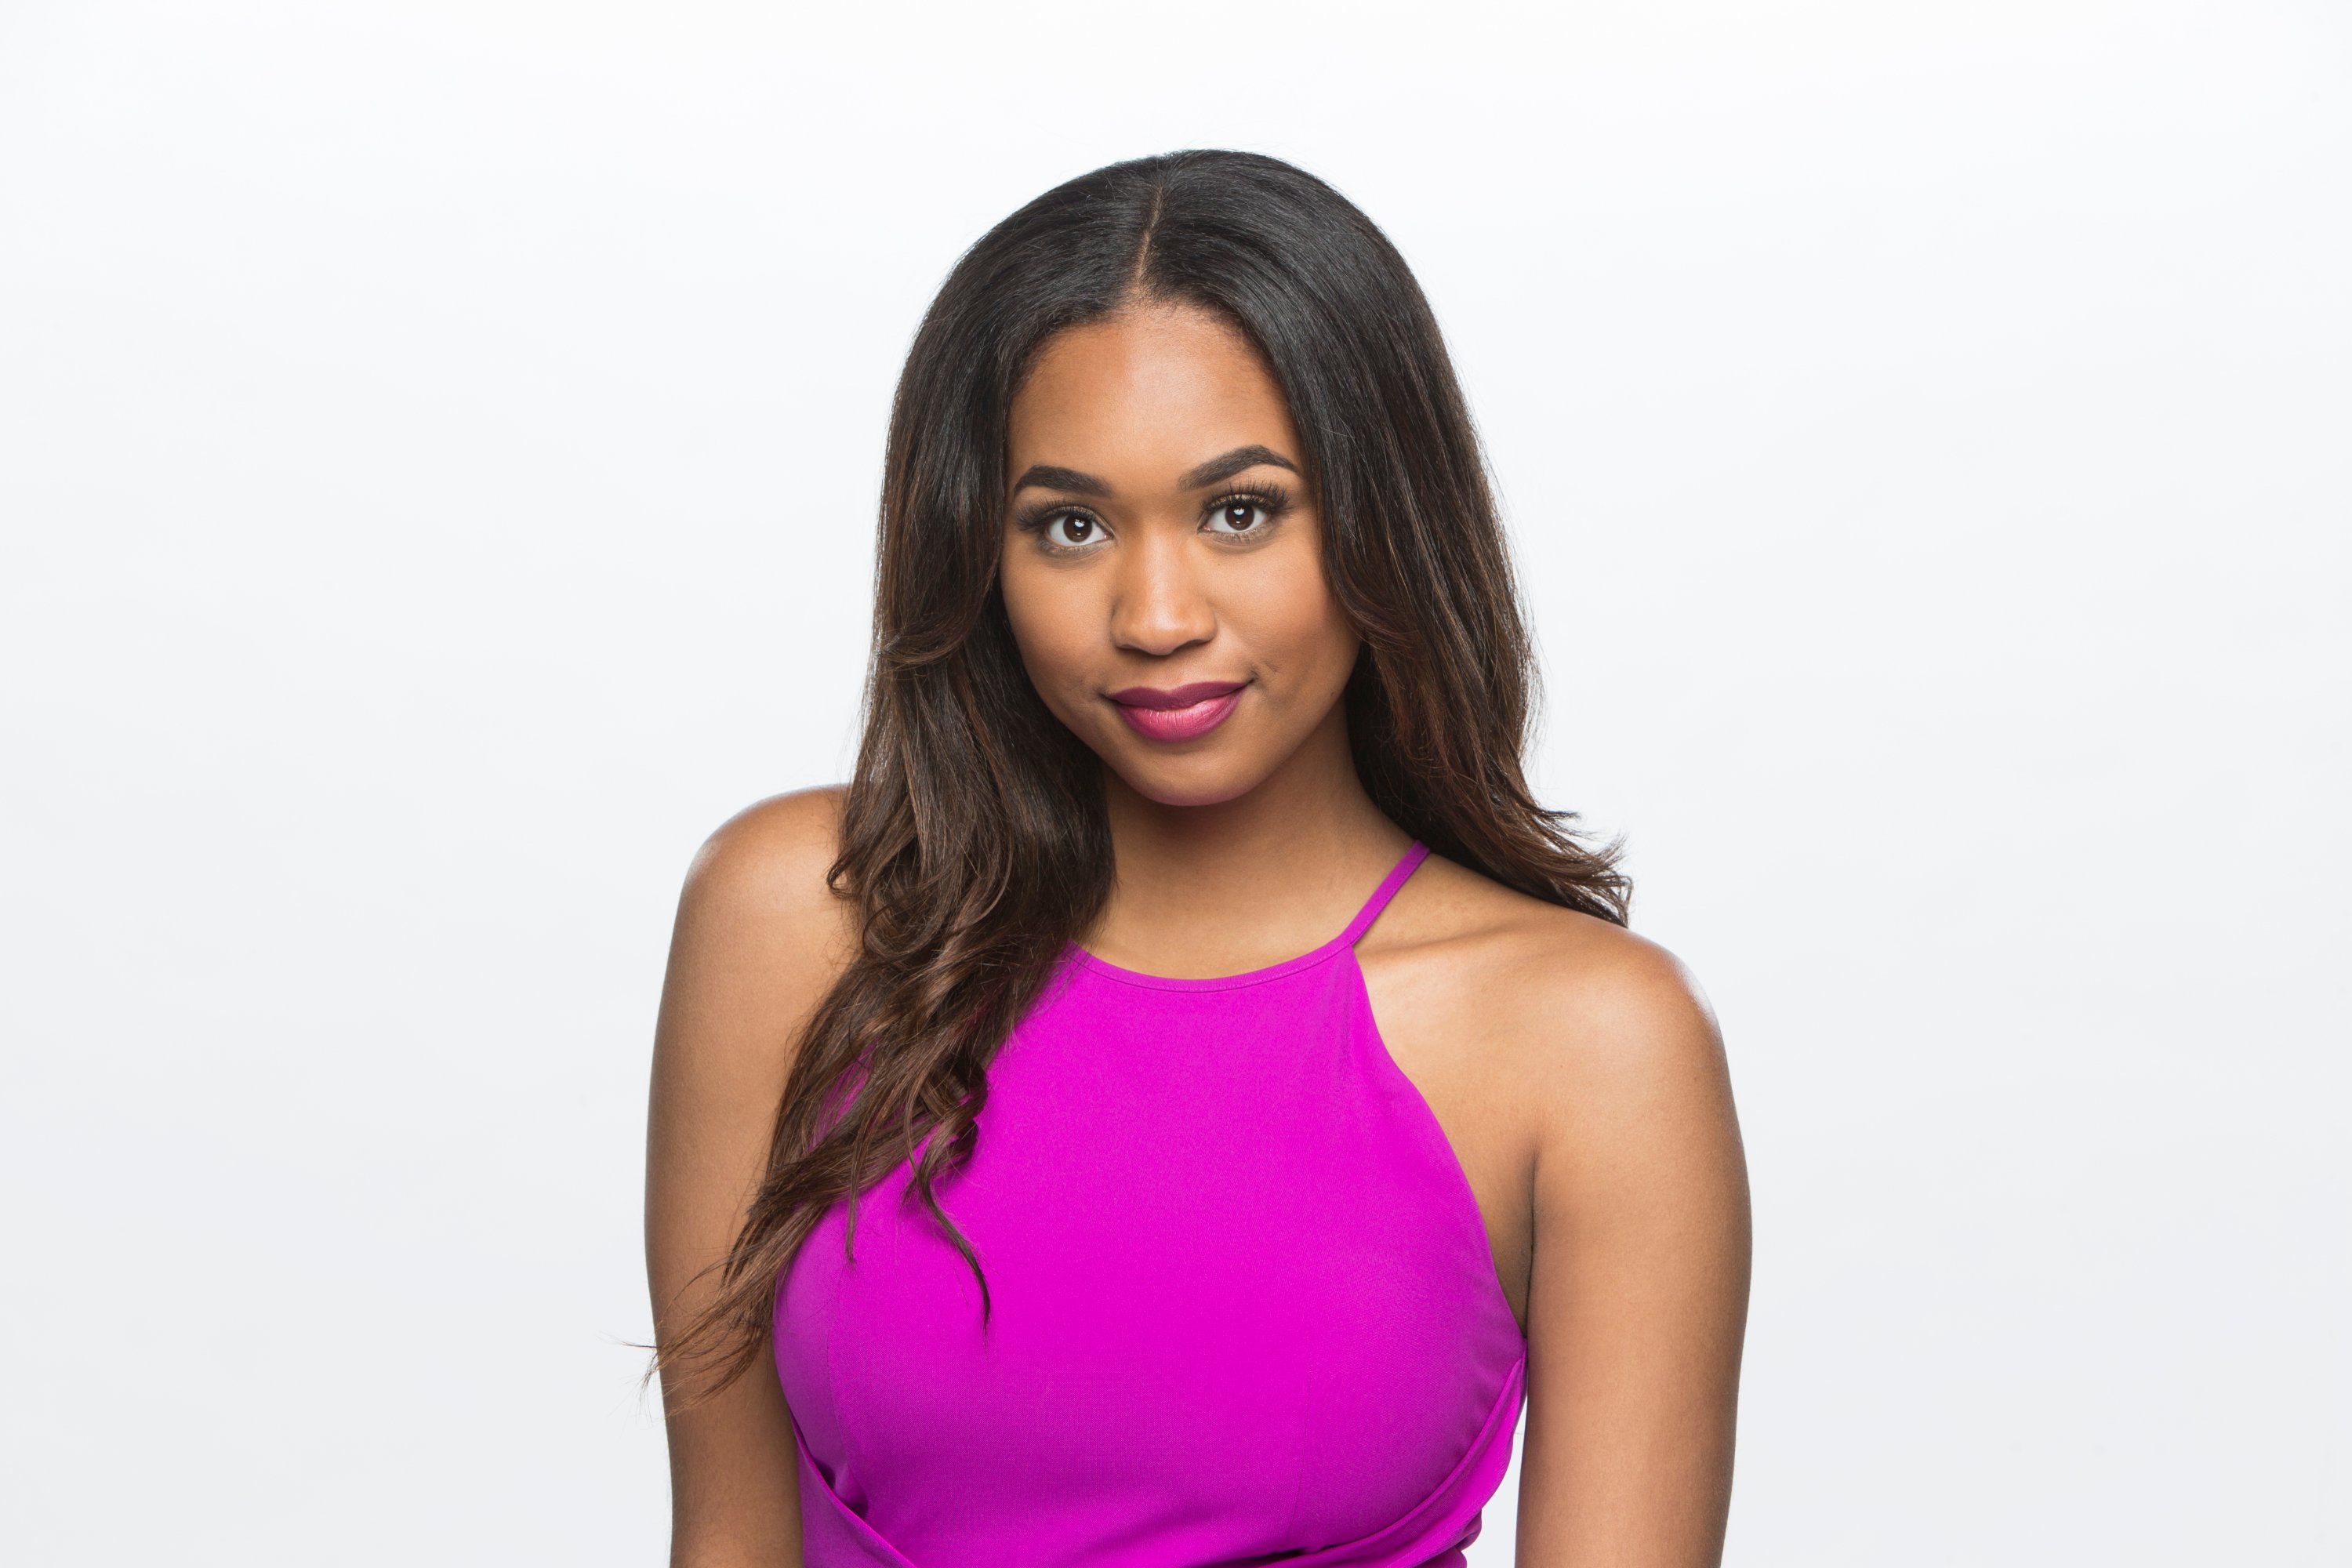 Bayleigh Dayton, houseguest on the CBS series Big Brother